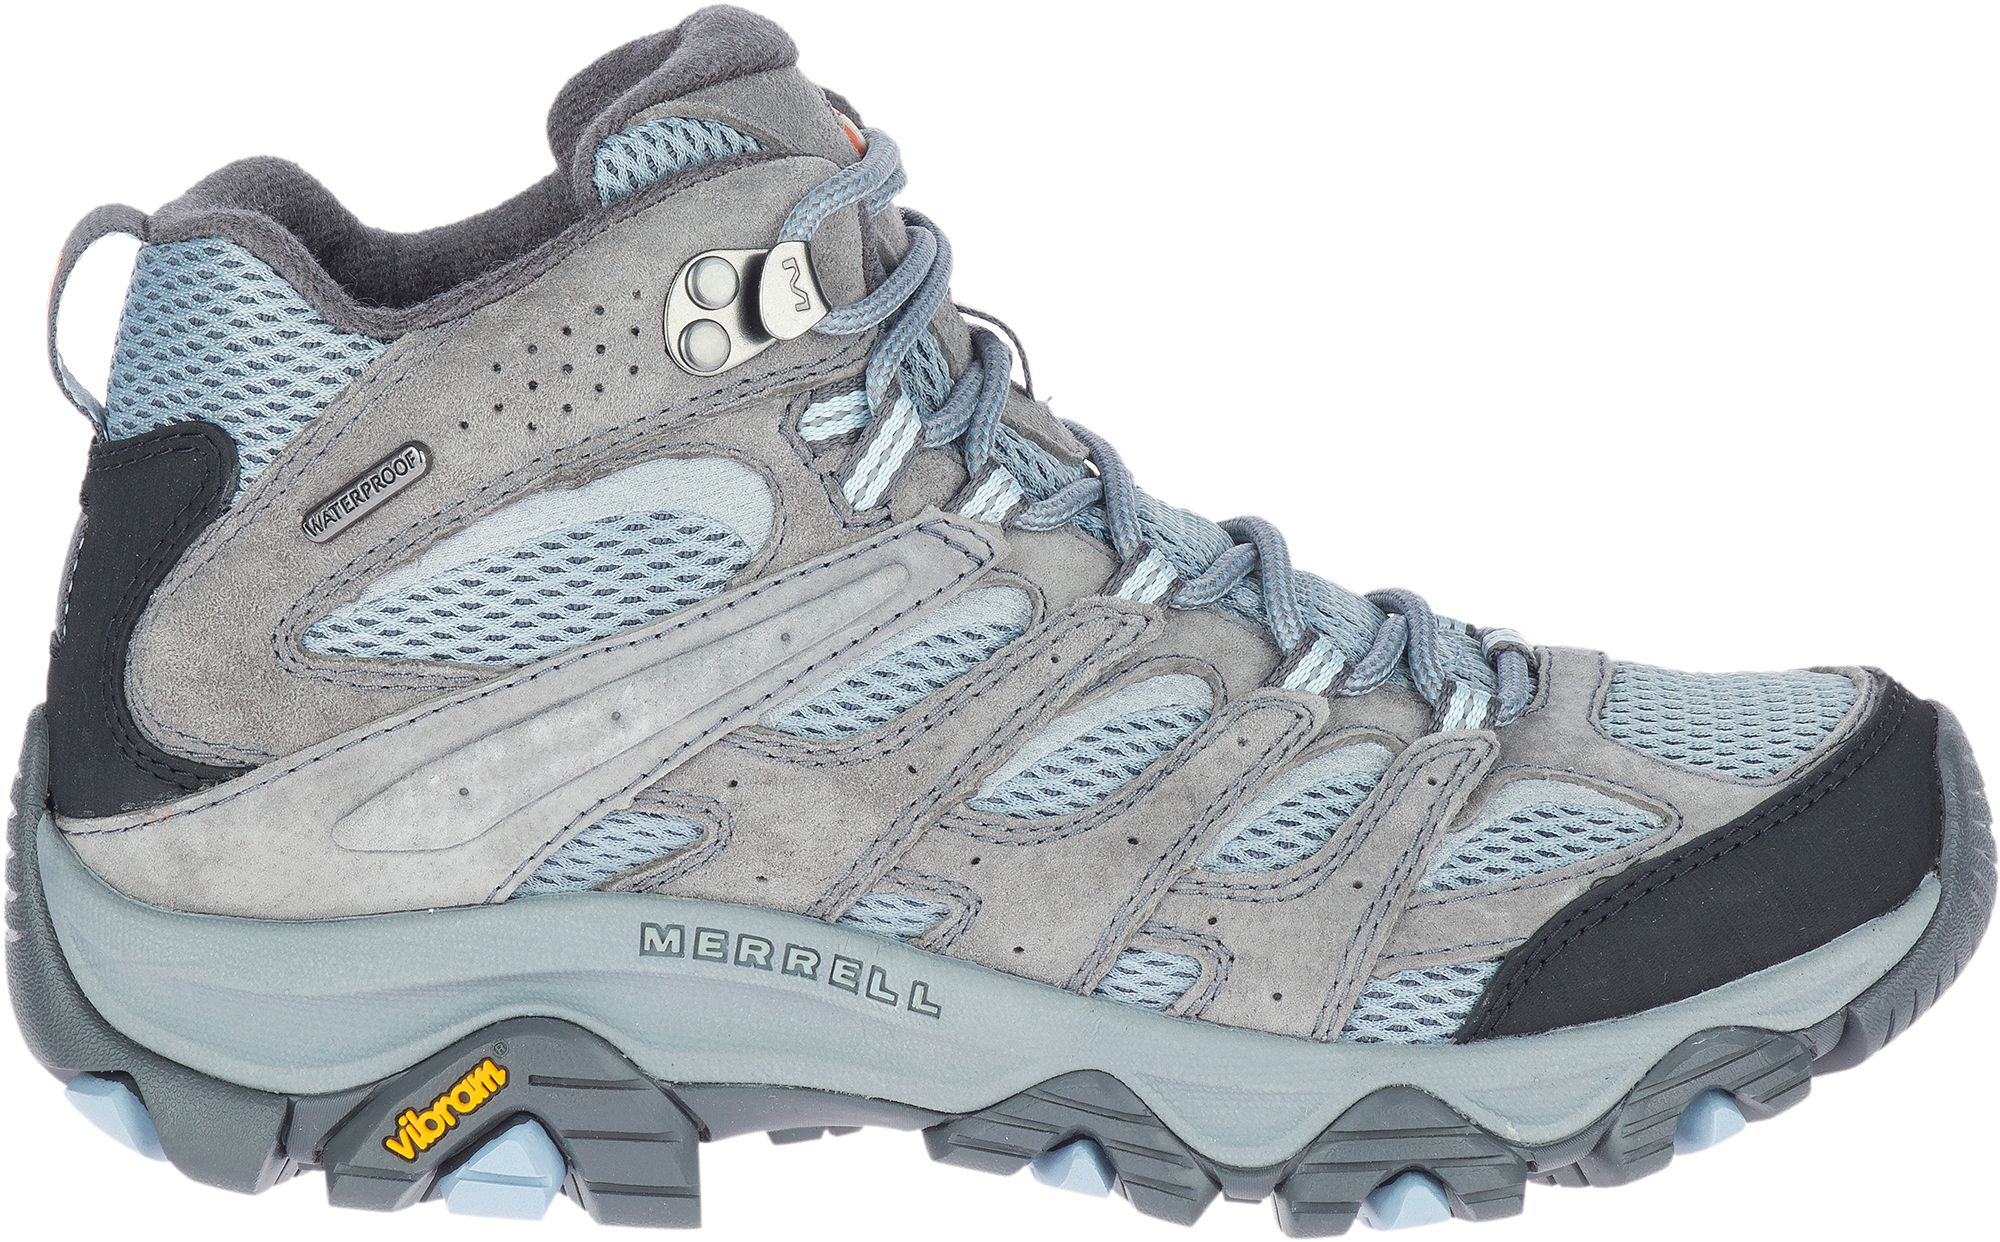 Photos - Trekking Shoes MERRELL Women's Moab 3 Mid Waterproof Hiking Boots, Size 10, Altitude Blue 